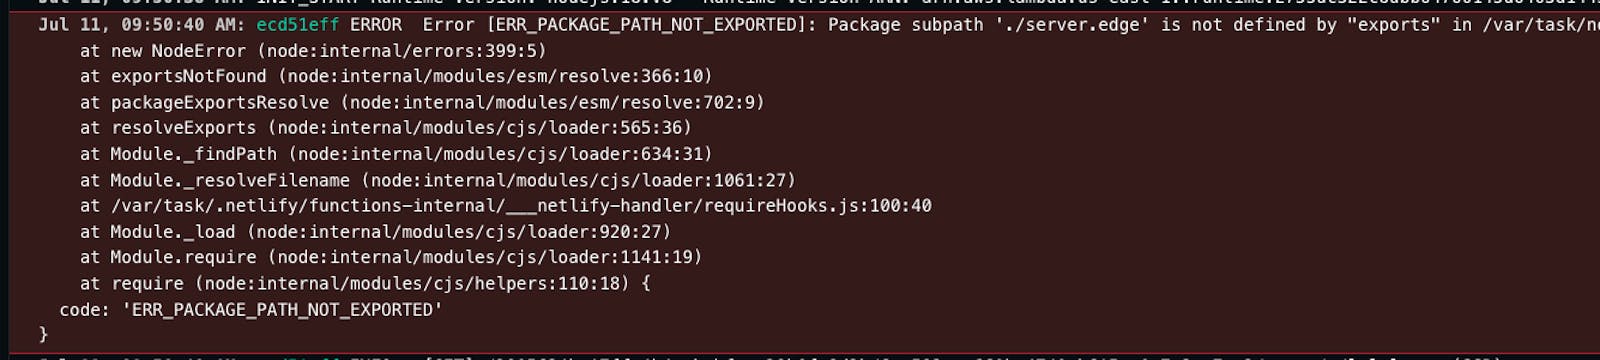 How to fix Error Package subpath './server.edge' is not defined by "exports" on Netlify